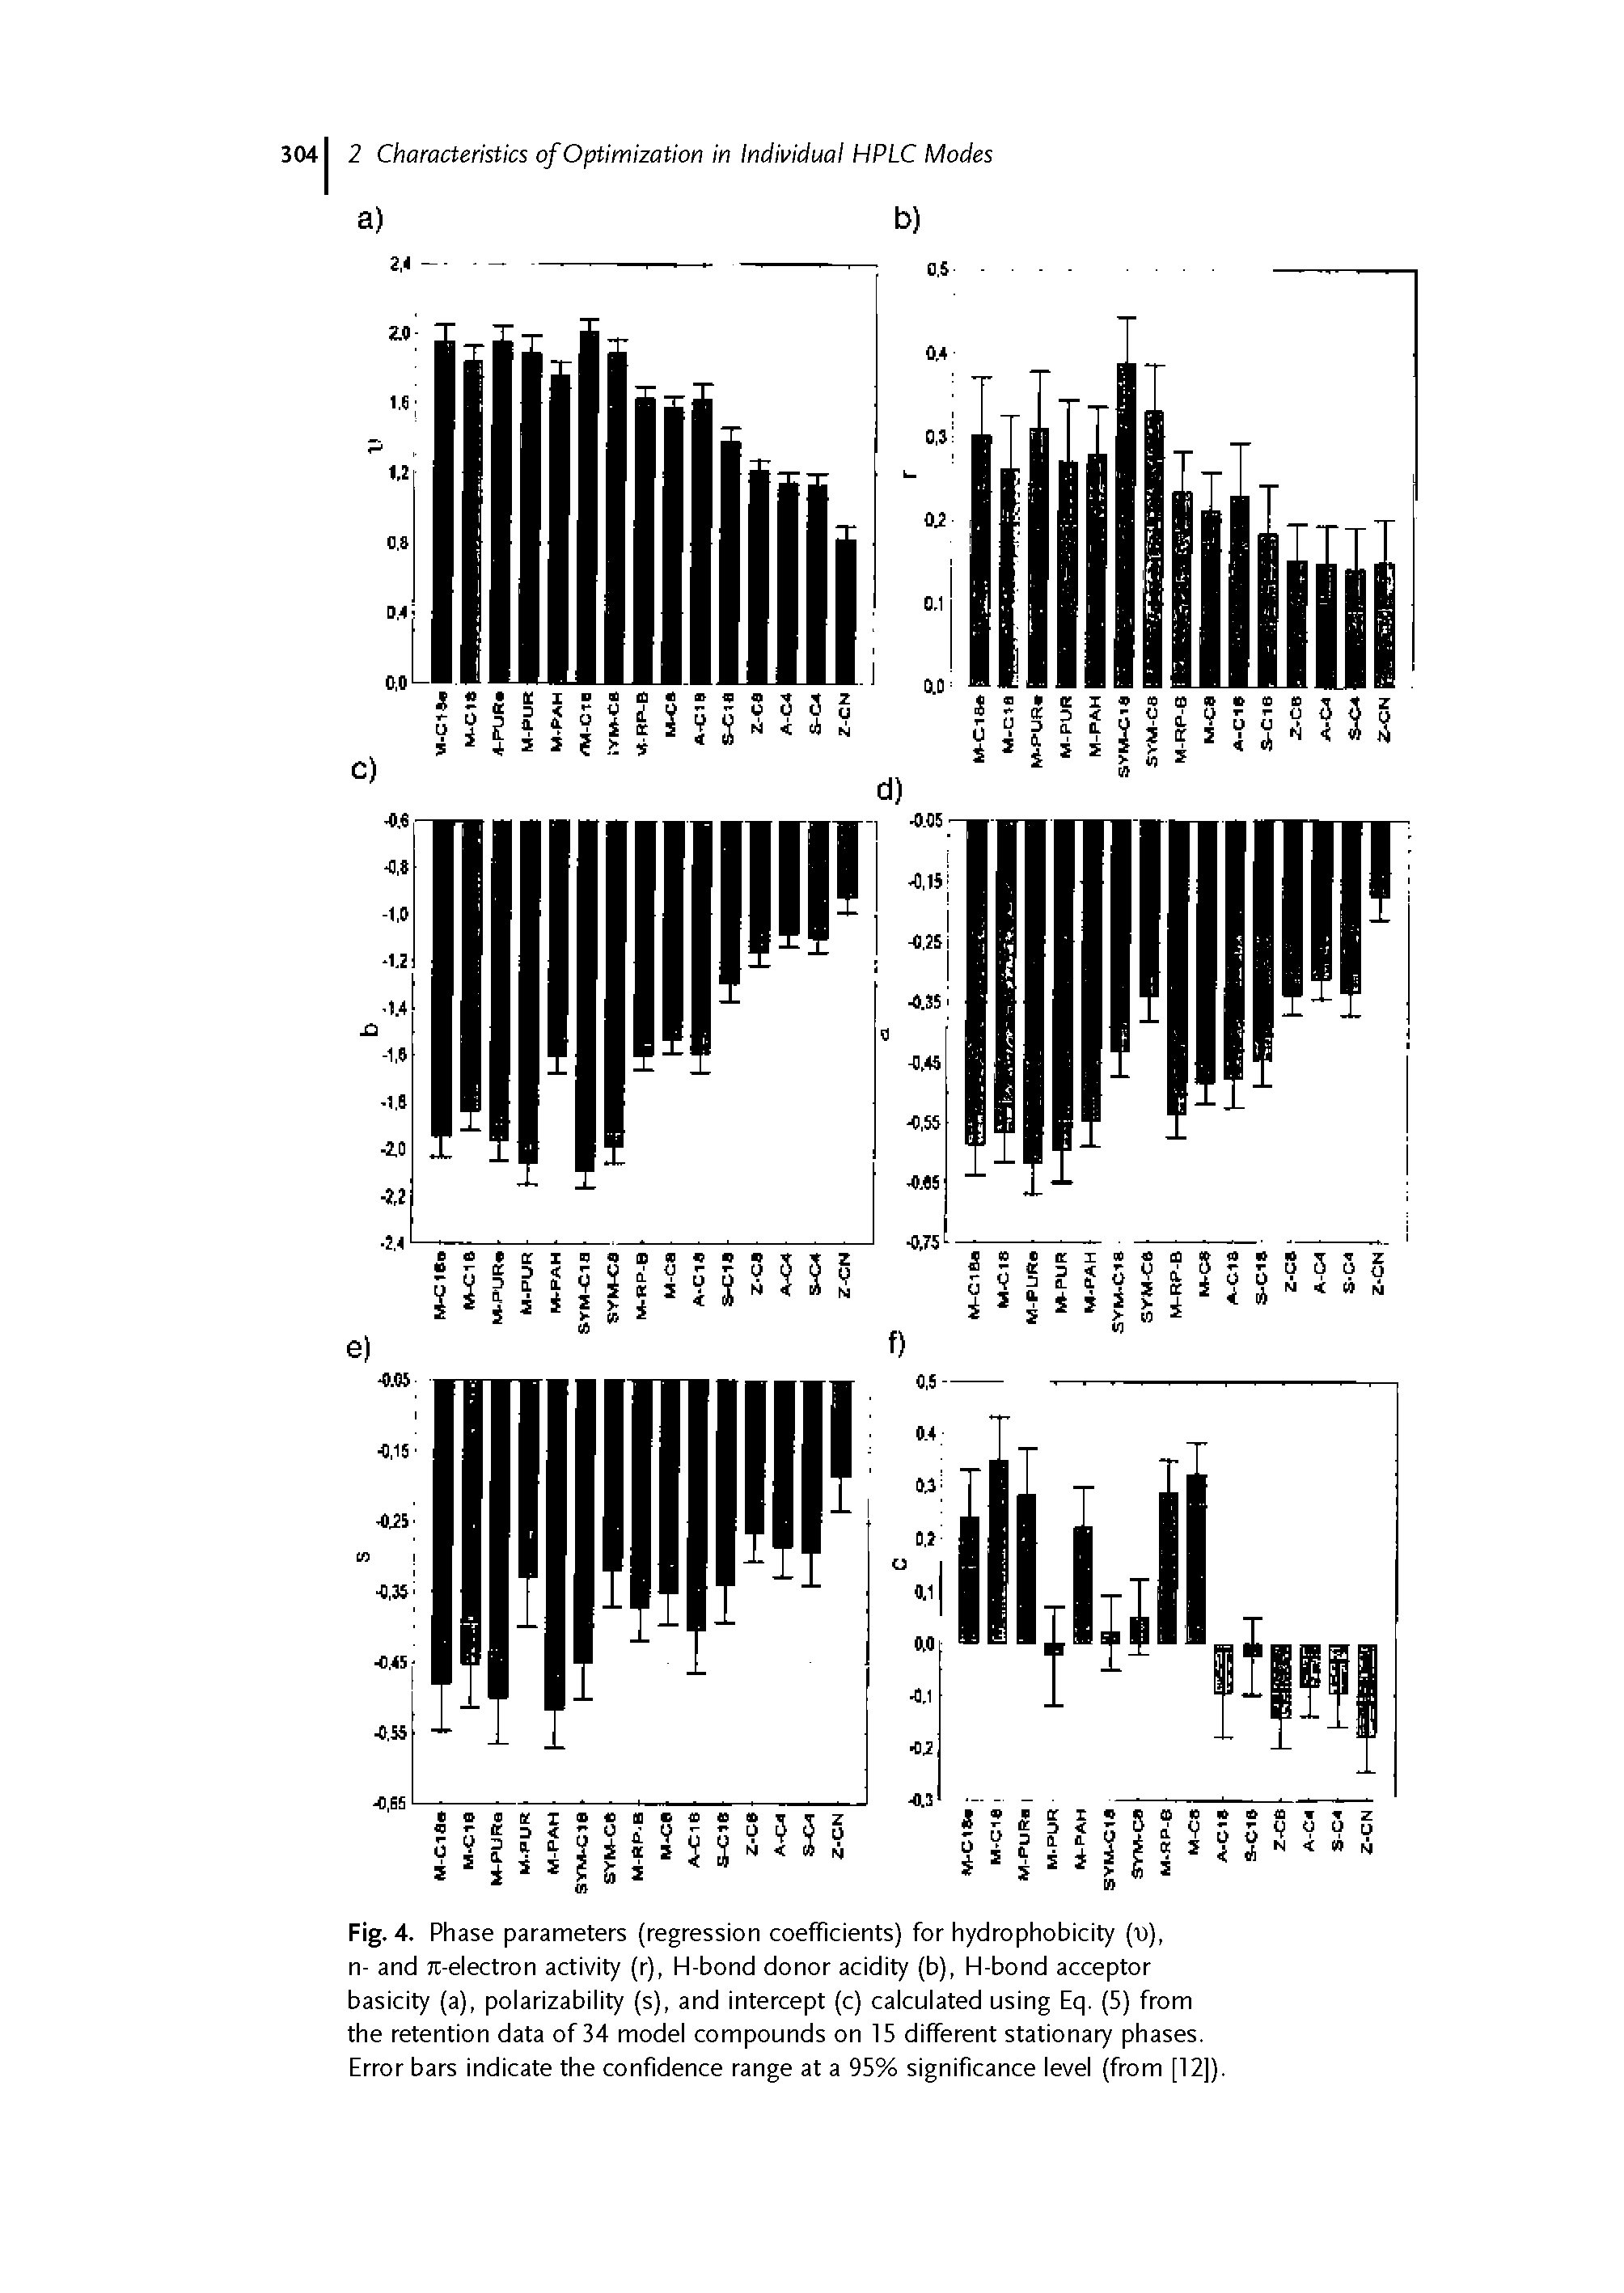 Fig. 4. Phase parameters (regression coefficients) for hydrophobicity (t)), n- and rc-electron activity (r), H-bond donor acidity (b), H-bond acceptor basicity (a), polarizability (s), and intercept (c) calculated using Eq. (5) from the retention data of 34 model compounds on 15 different stationary phases. Error bars indicate the confidence range at a 95% significance level (from [12]).